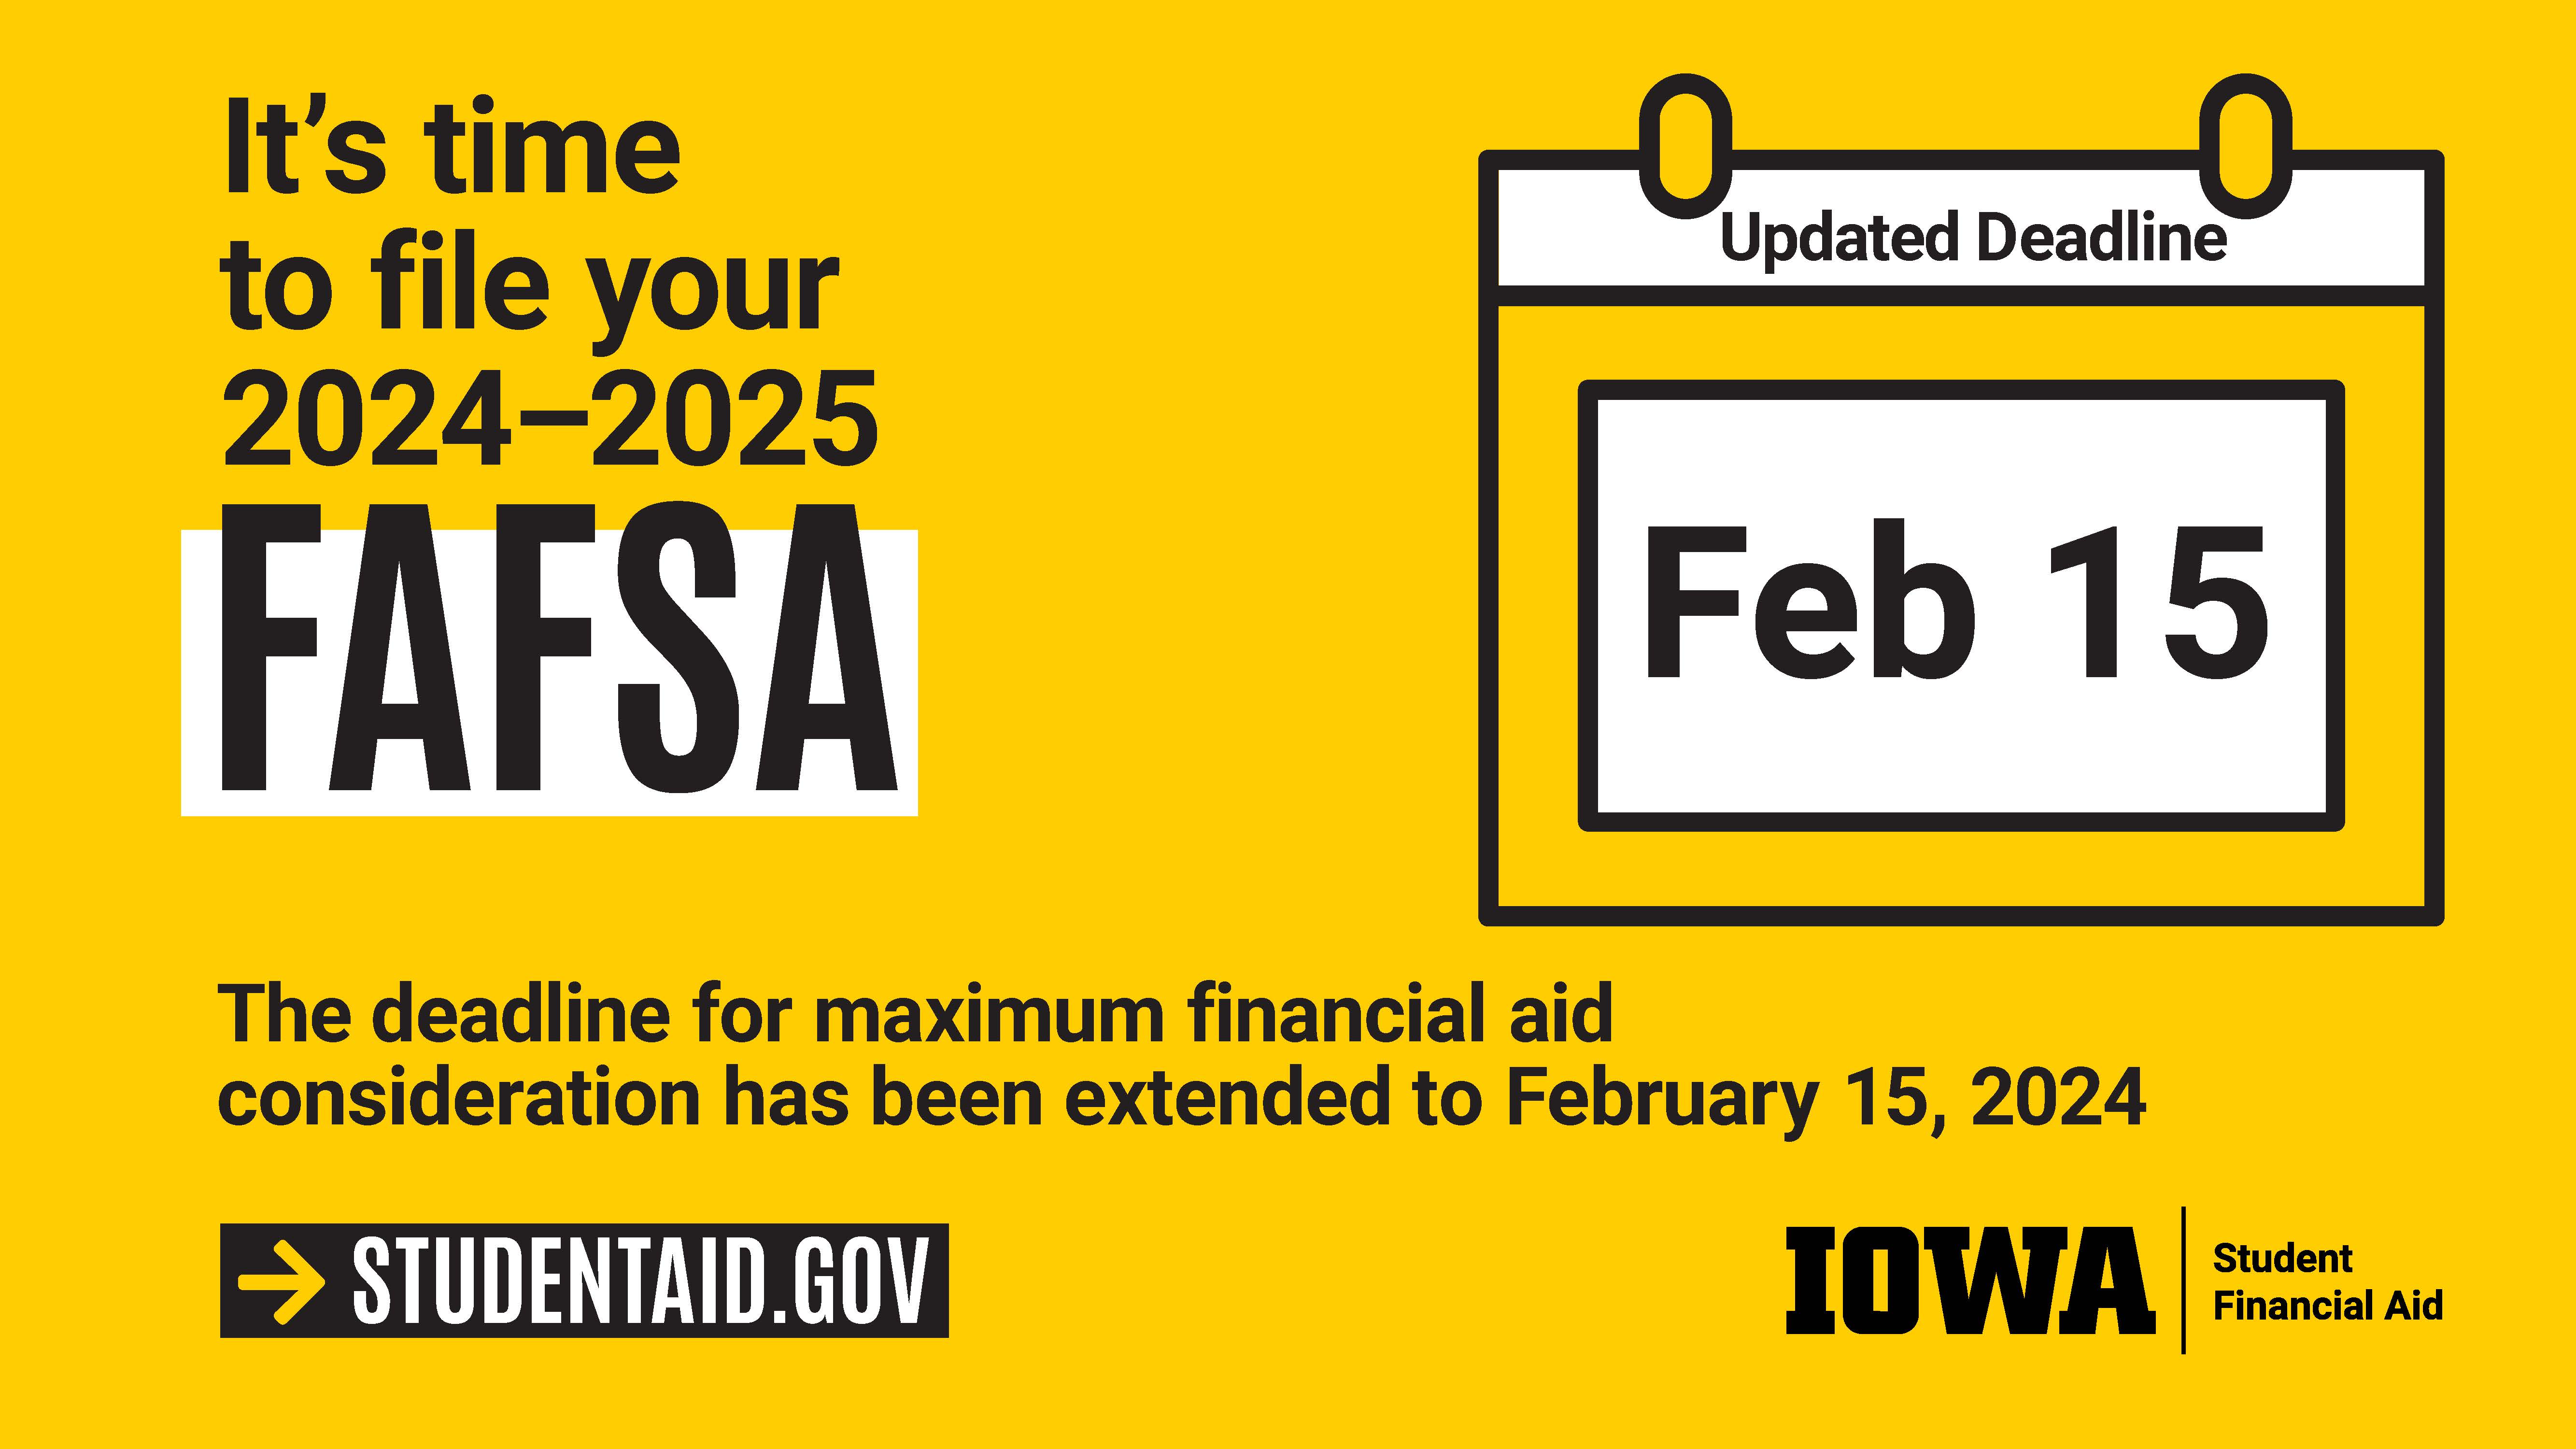 It's time to file your 2024-2025 FAFSA. Deadline is February 15.